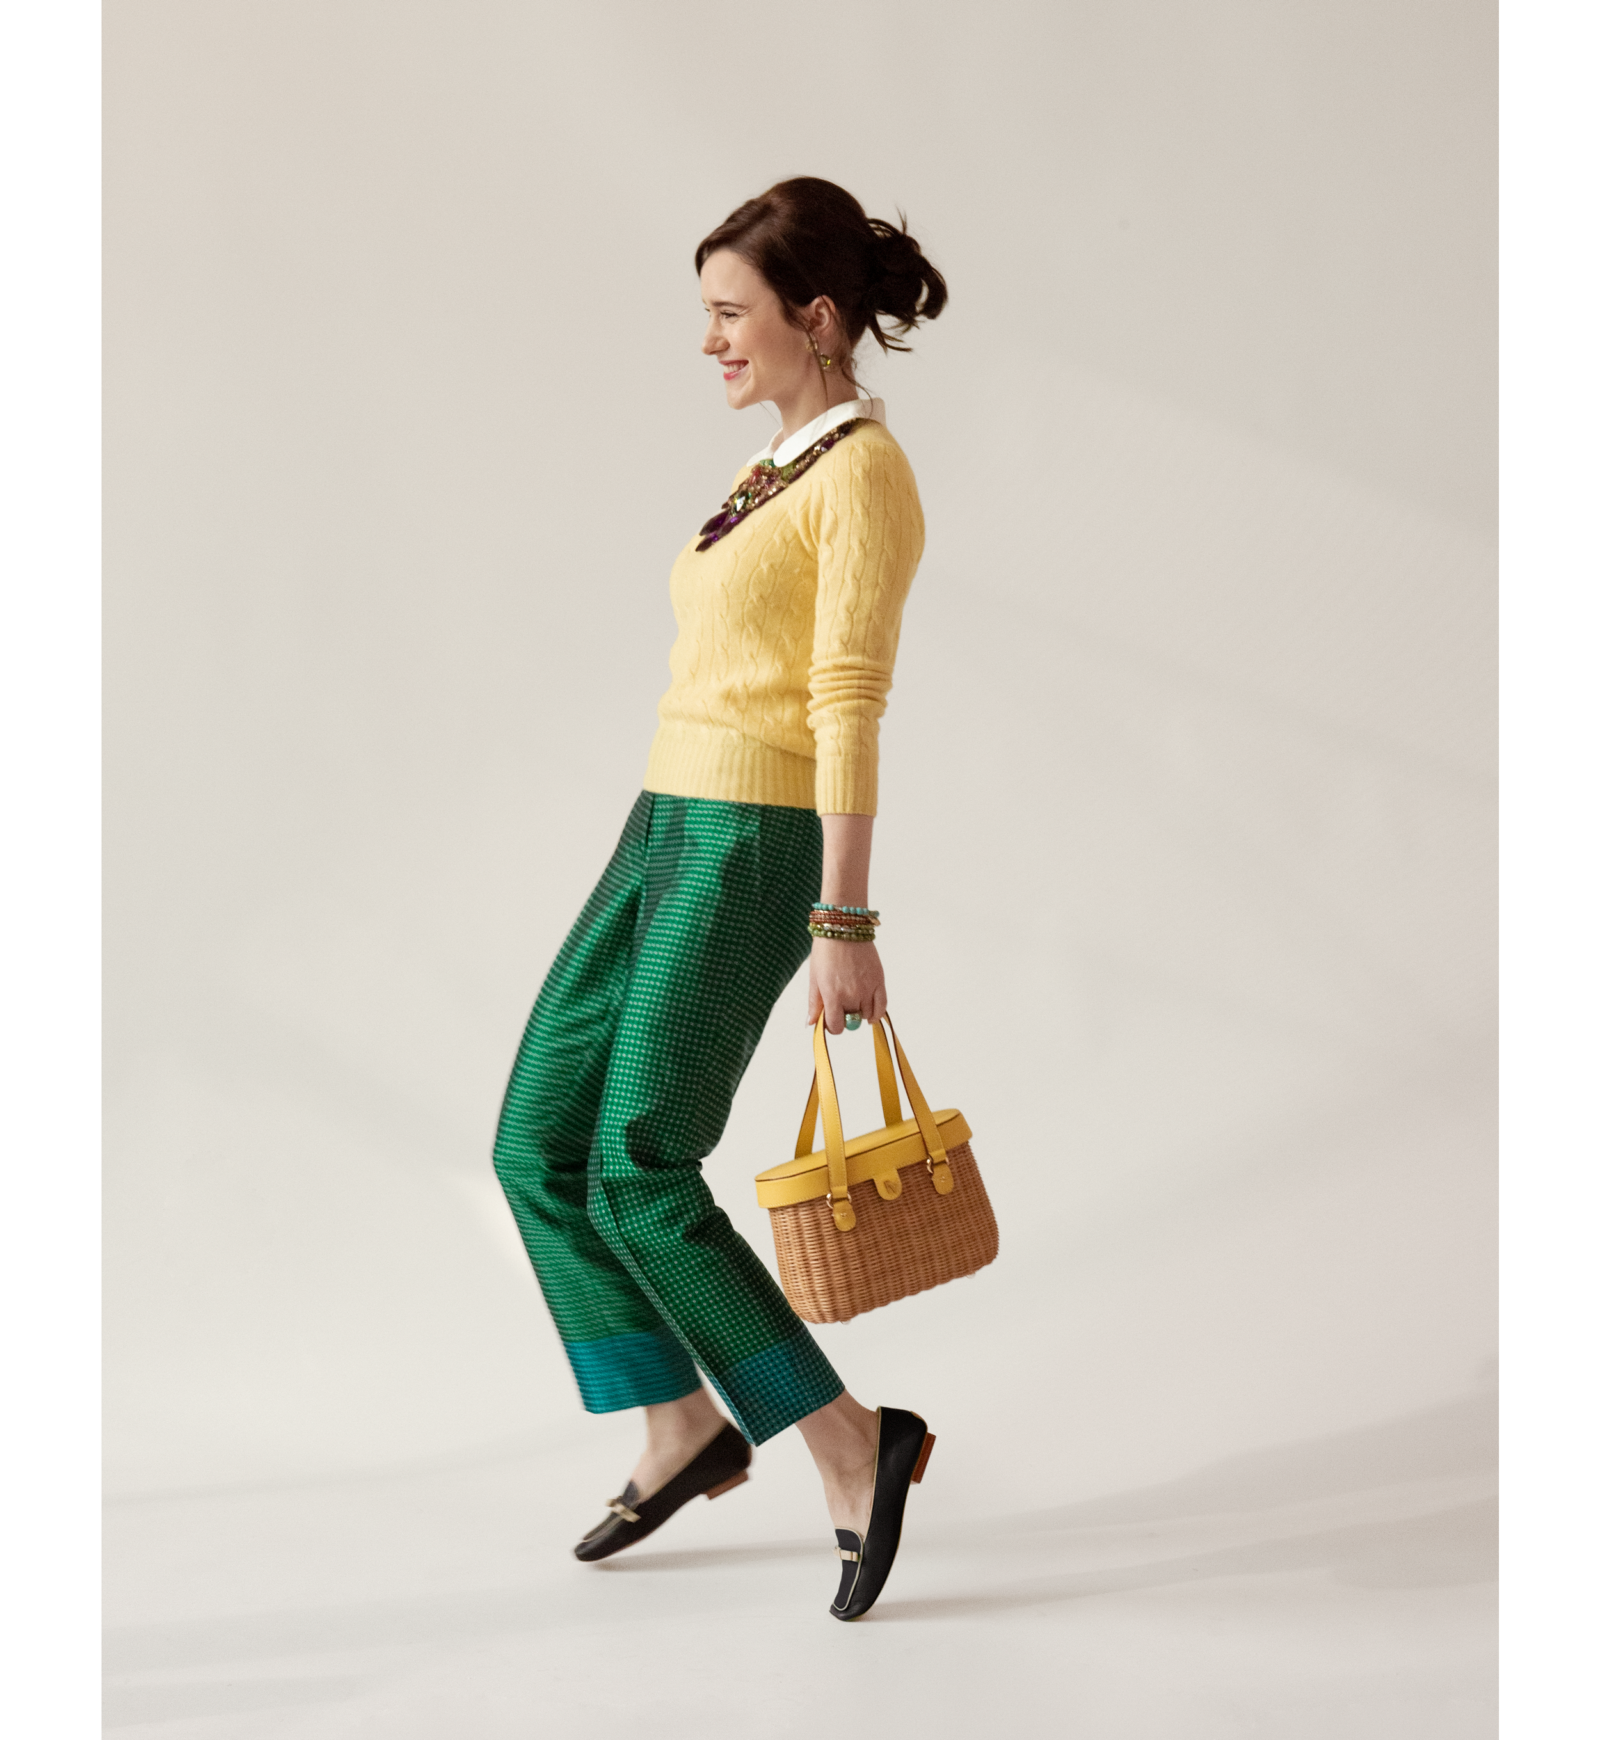 Rachel Brosnahan Pays Loving Tribute to Her Late Aunt Kate Spade in New  Campaign